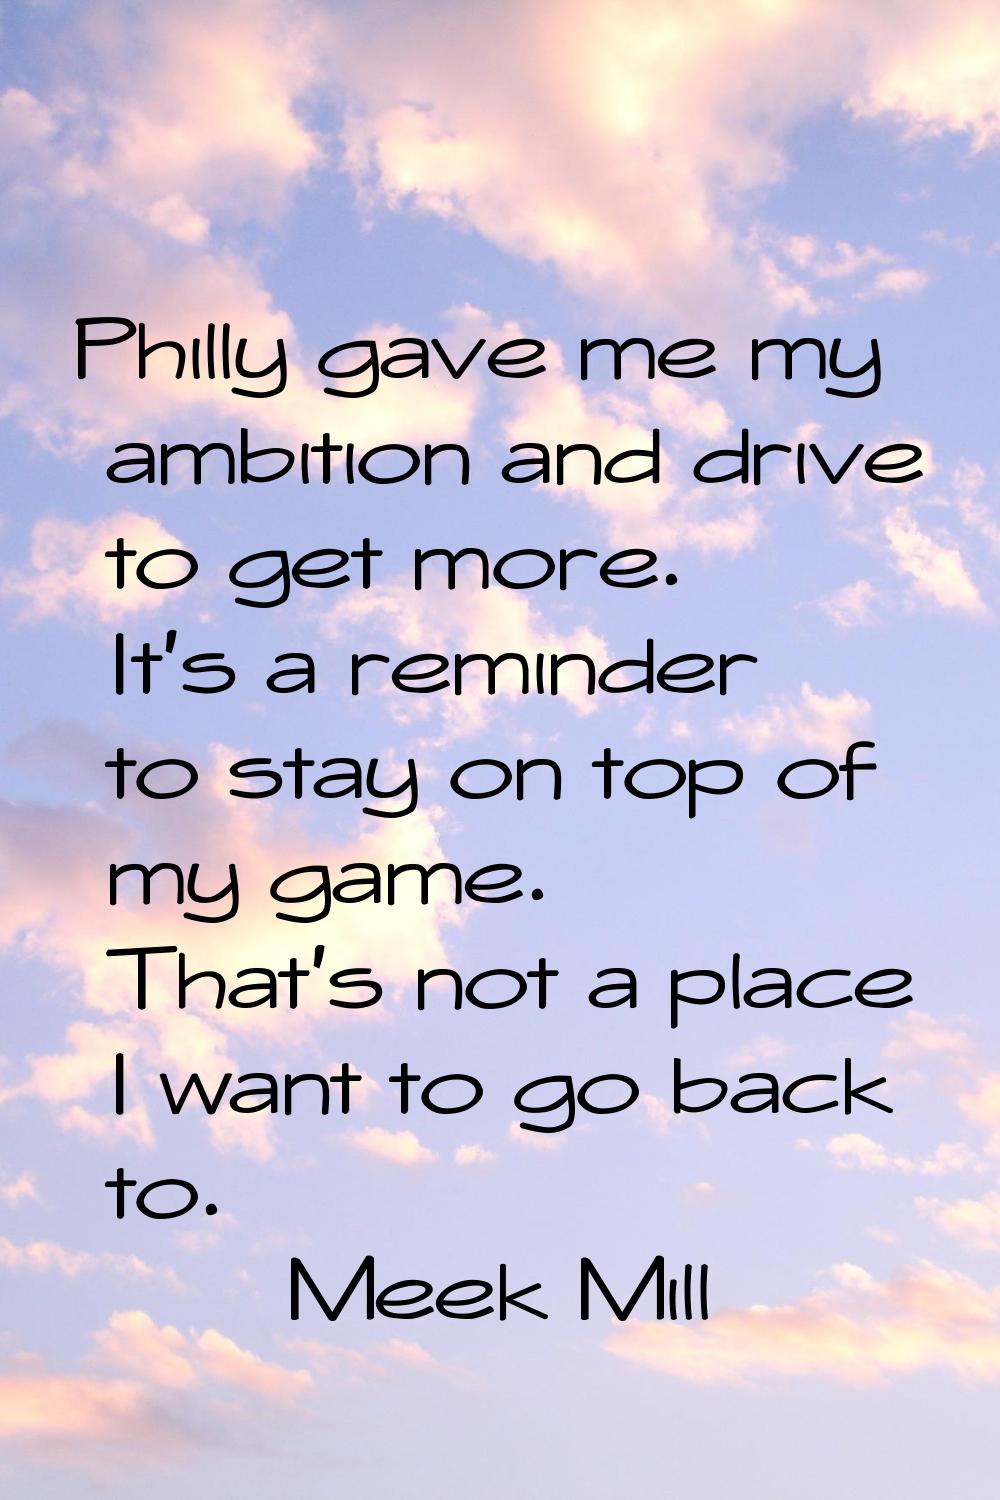 Philly gave me my ambition and drive to get more. It's a reminder to stay on top of my game. That's